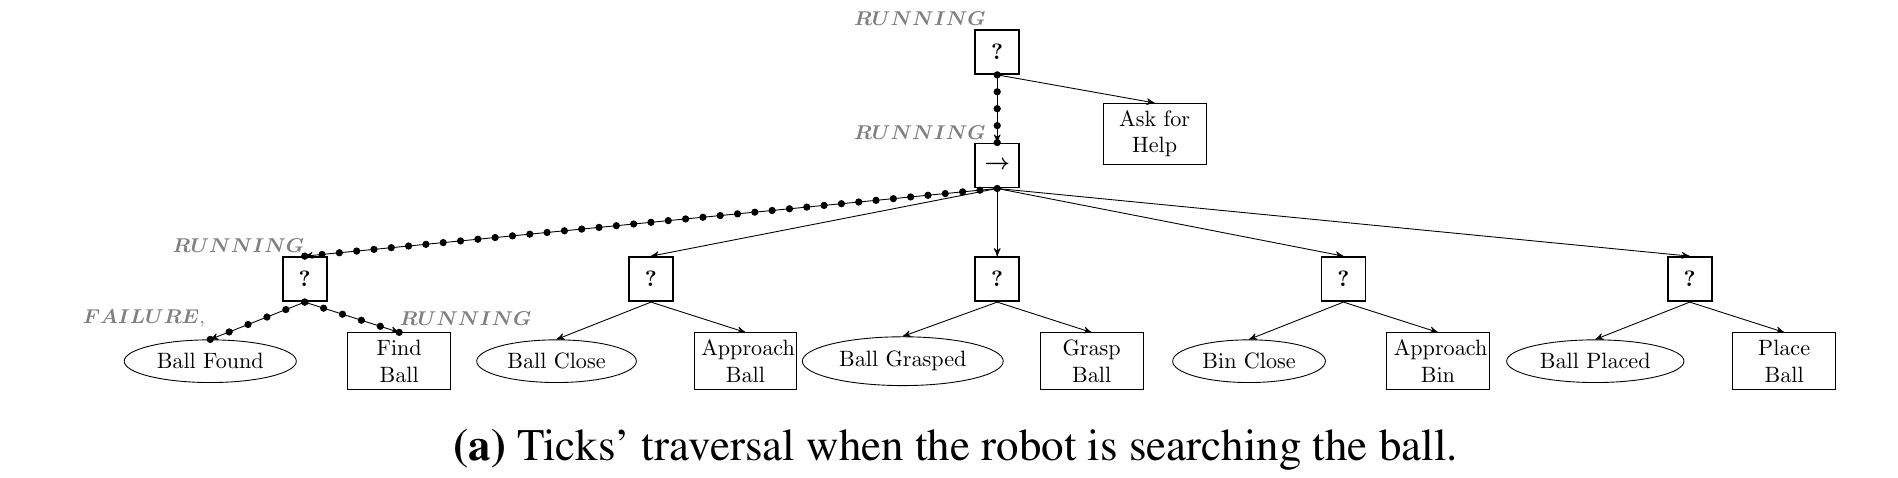 Paper Insight: Learning of Behavior Trees for Autonomous Agents